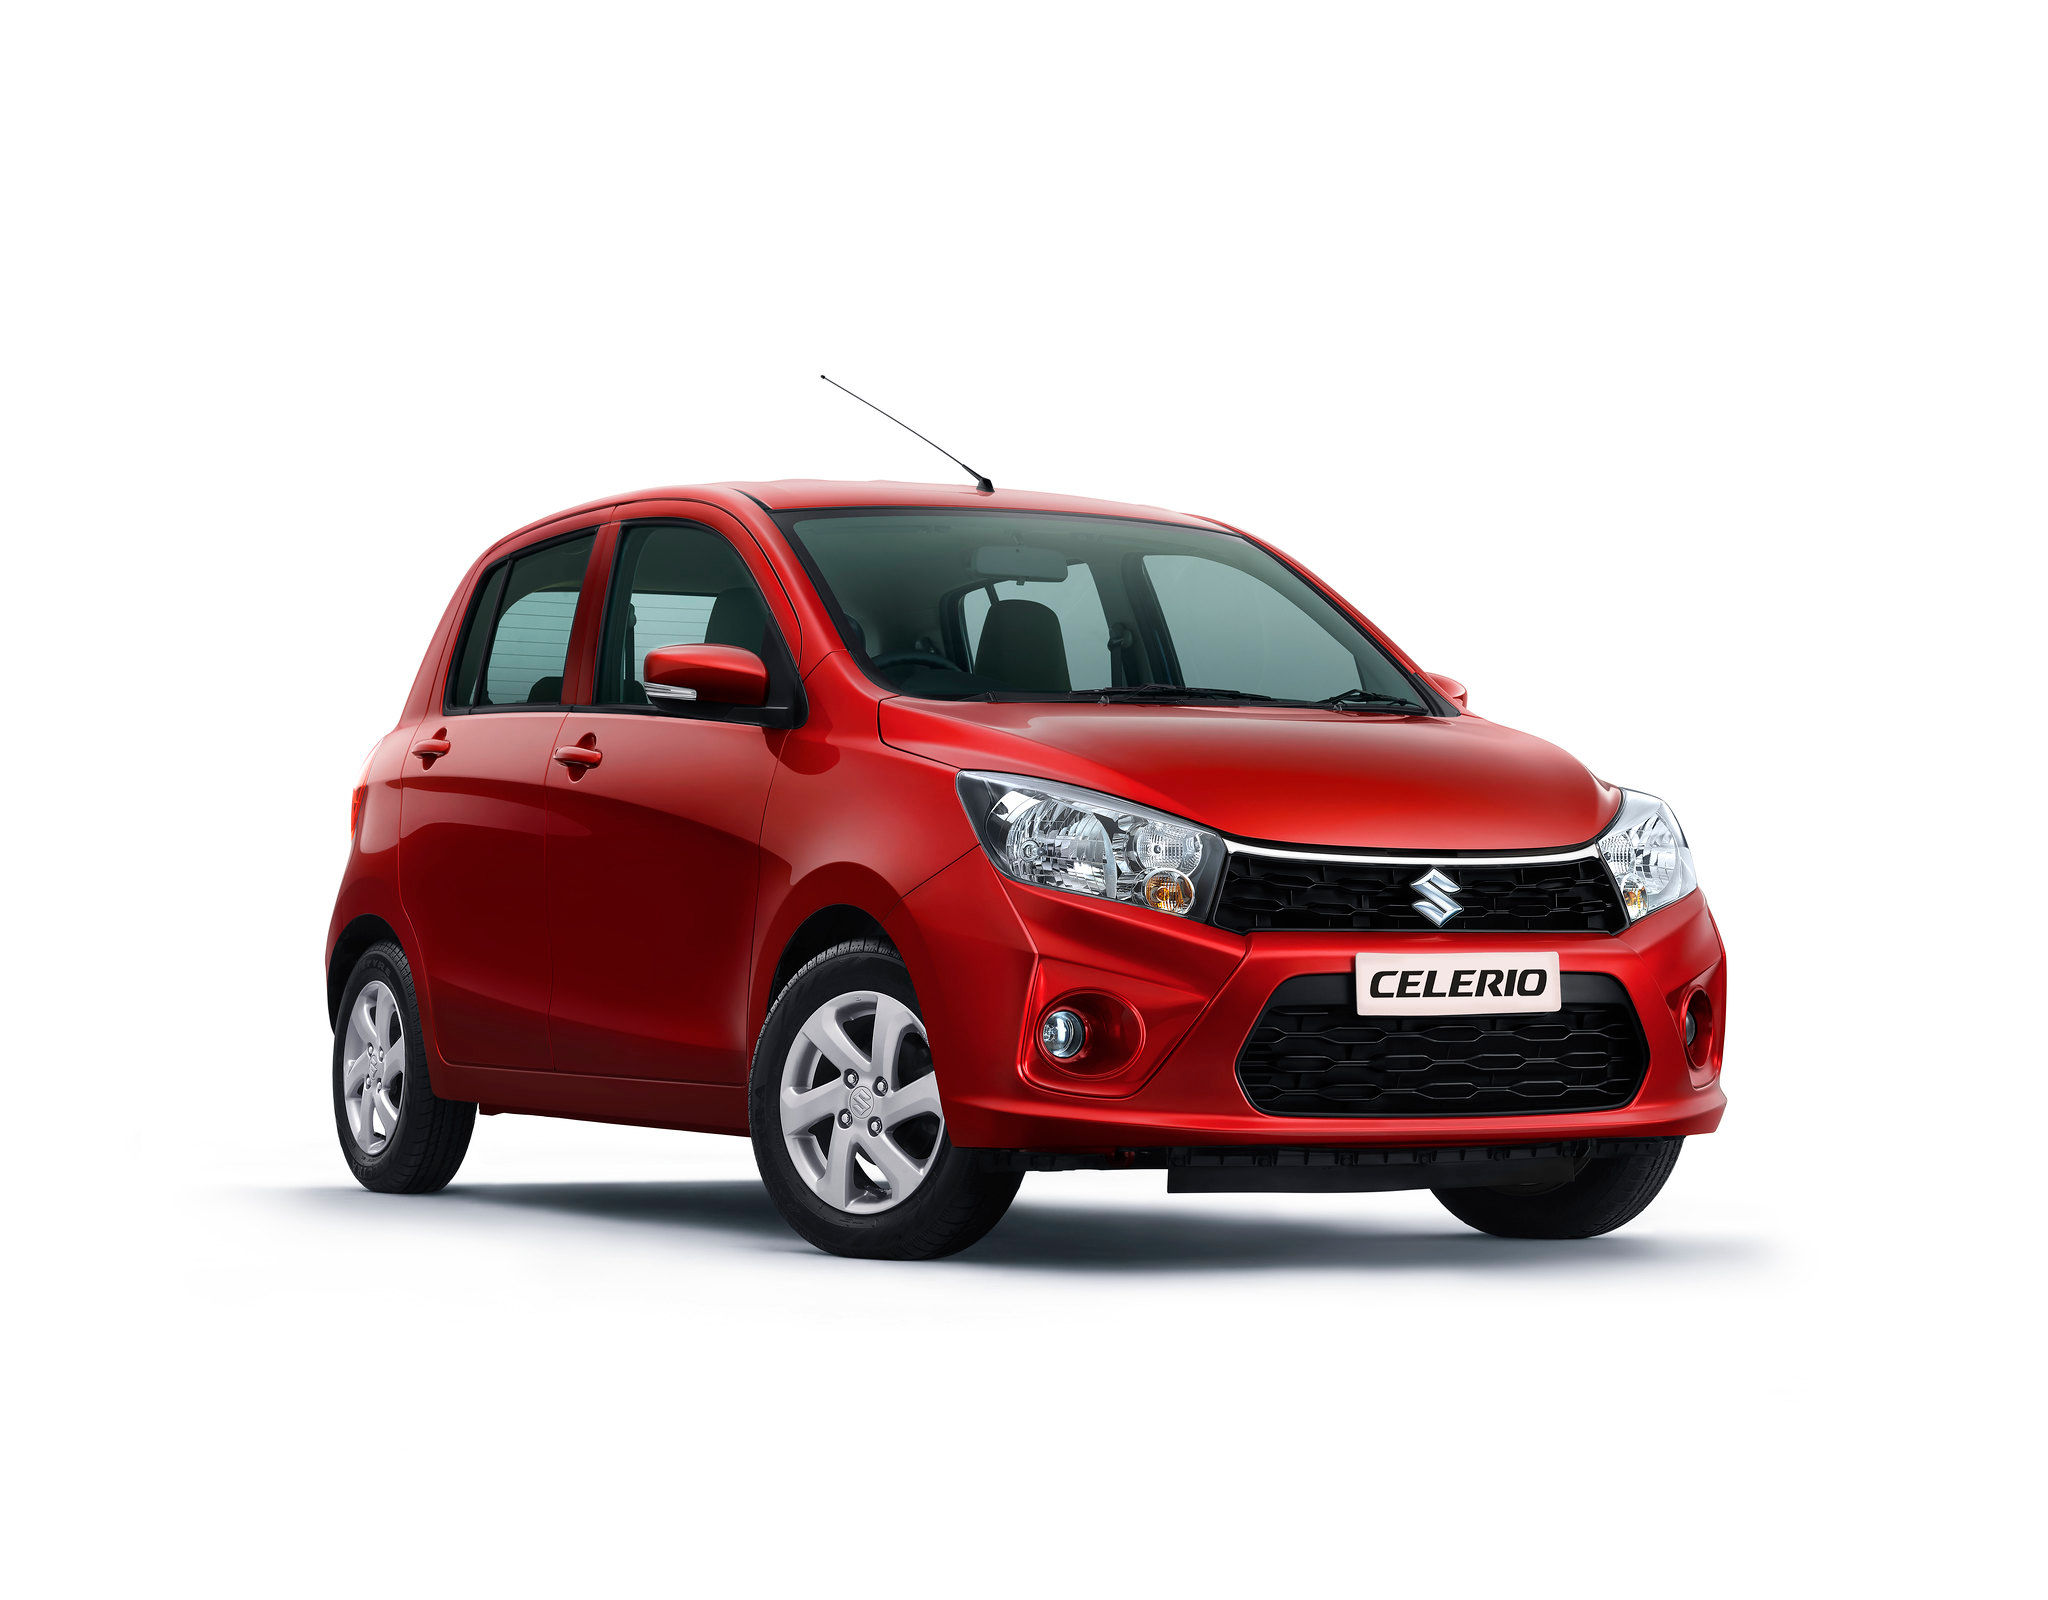 Maruti Suzuki Celerio BS6 Hatchback Launched In India At Rs 4.41 Lakh - ZigWheels